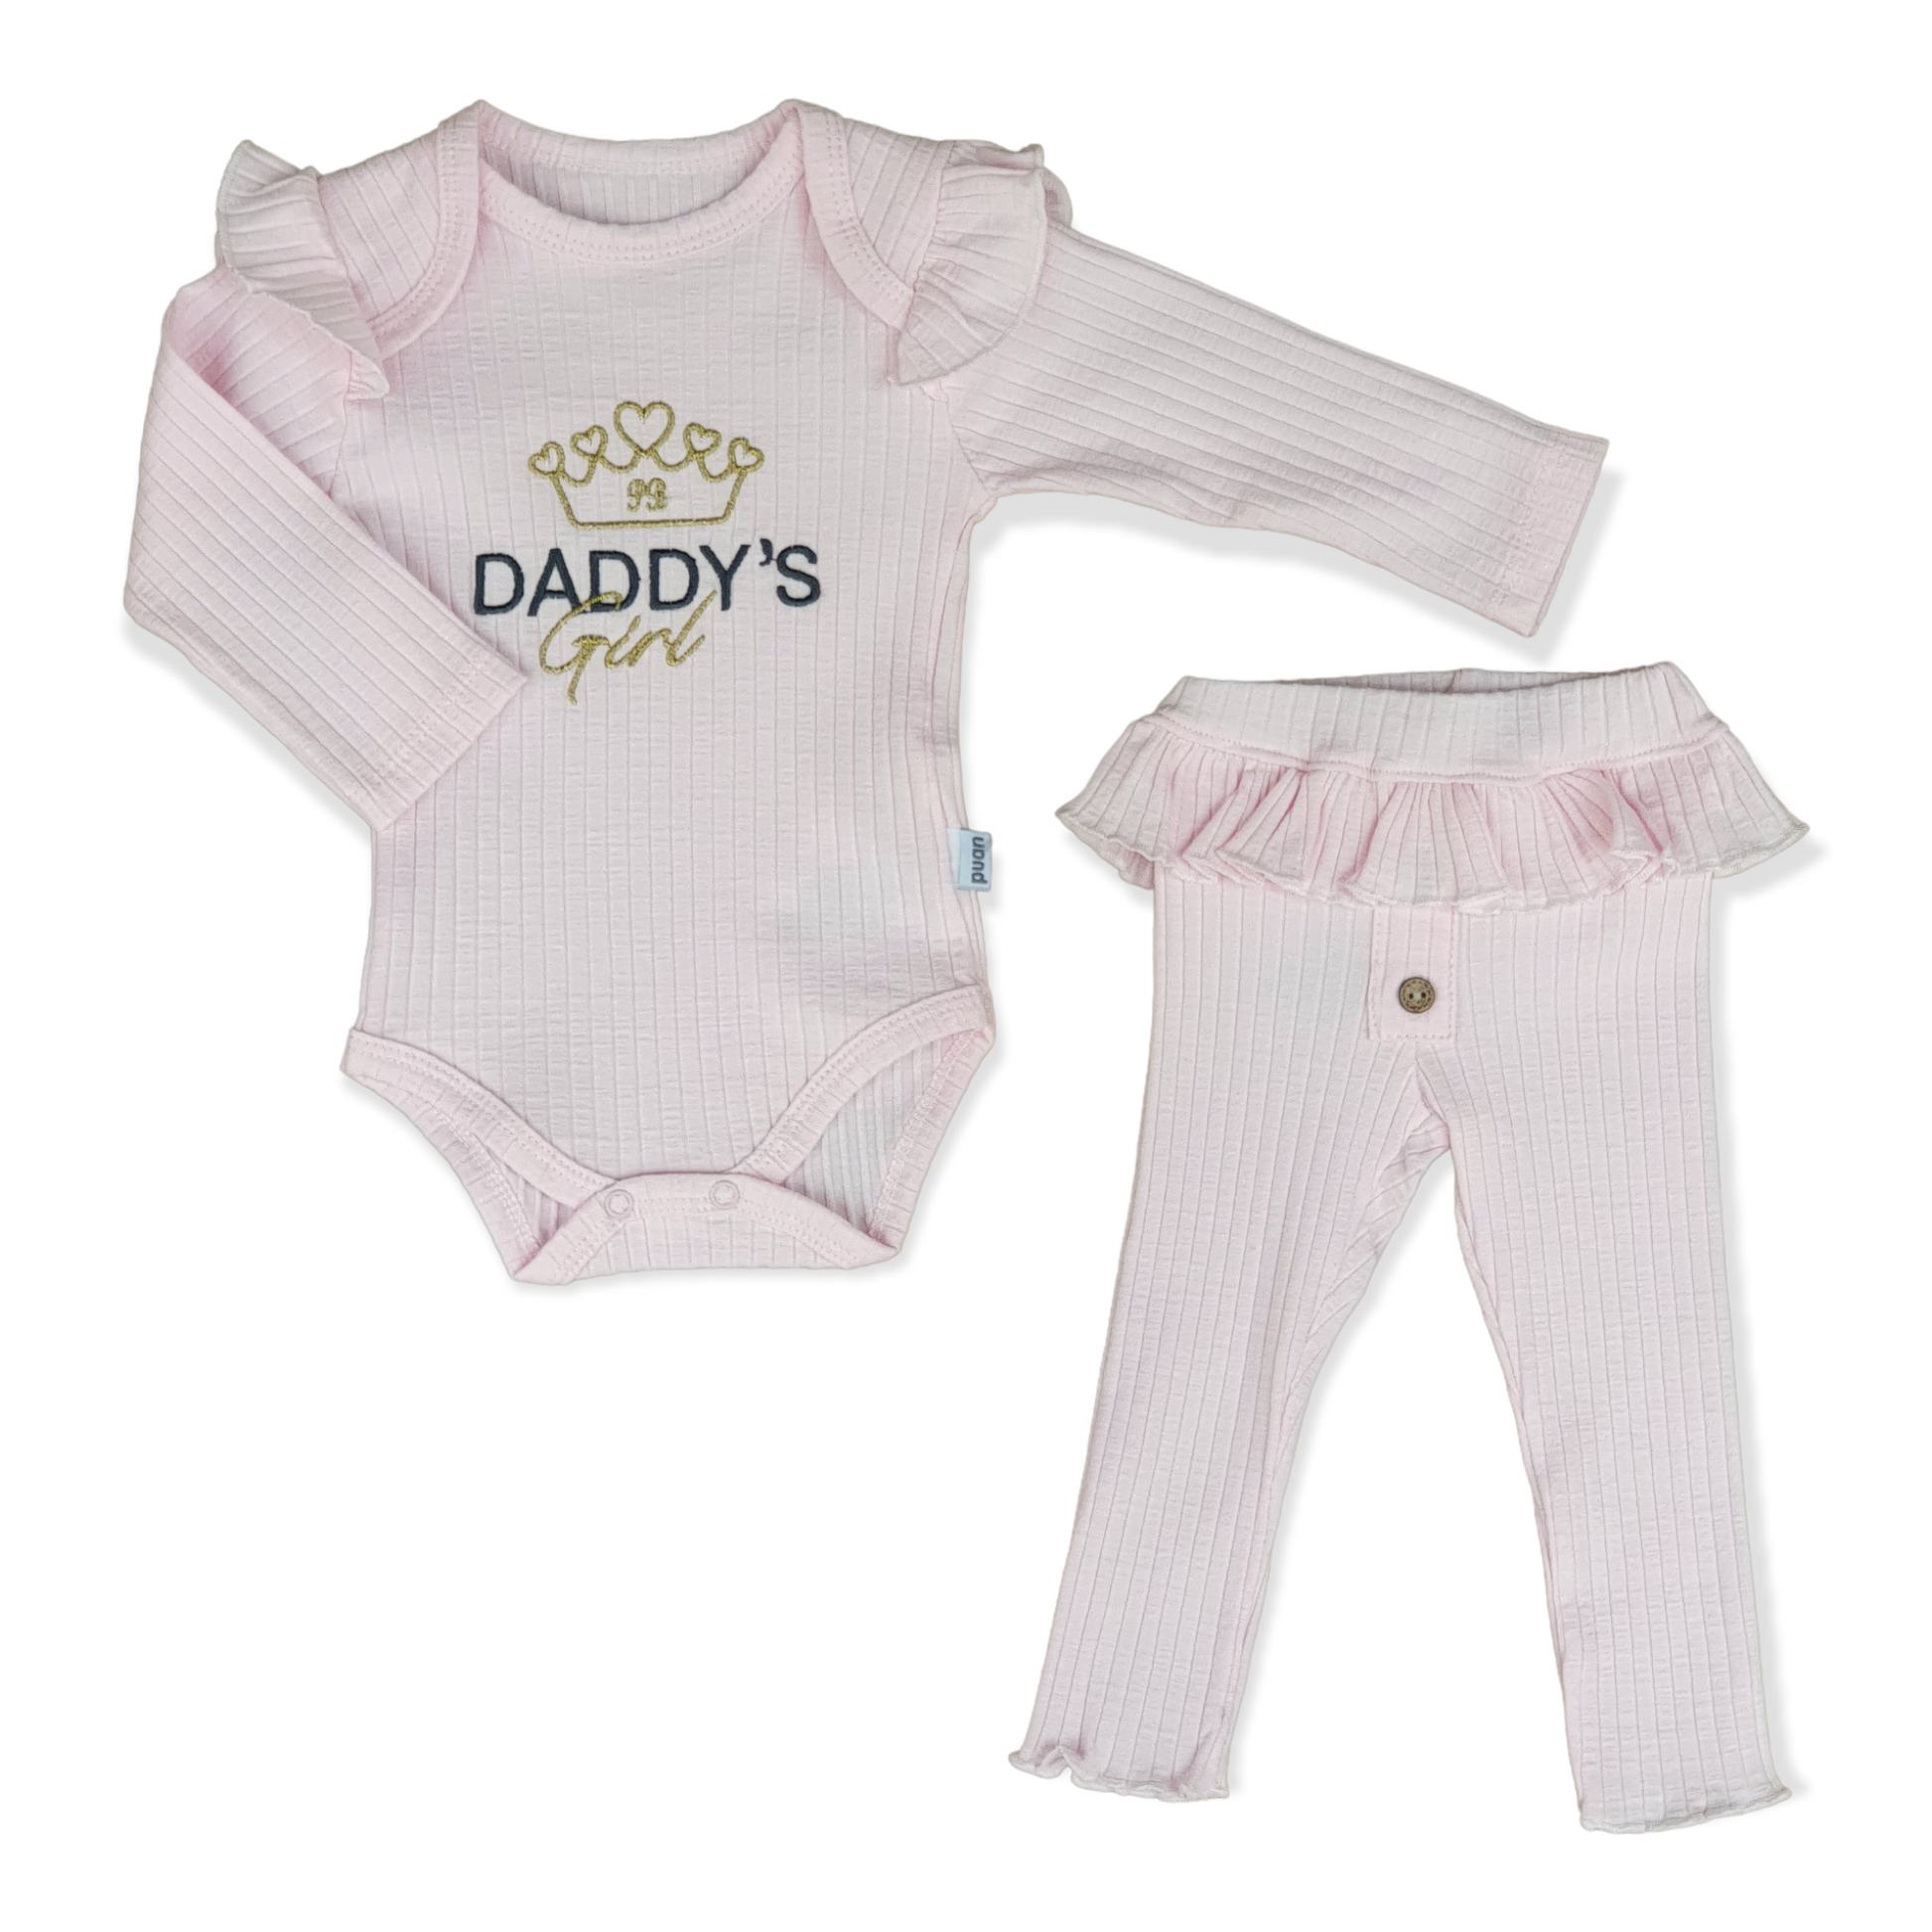 Puanbaby - Long Sleeve Pink Daddy's Girl Body with Pants